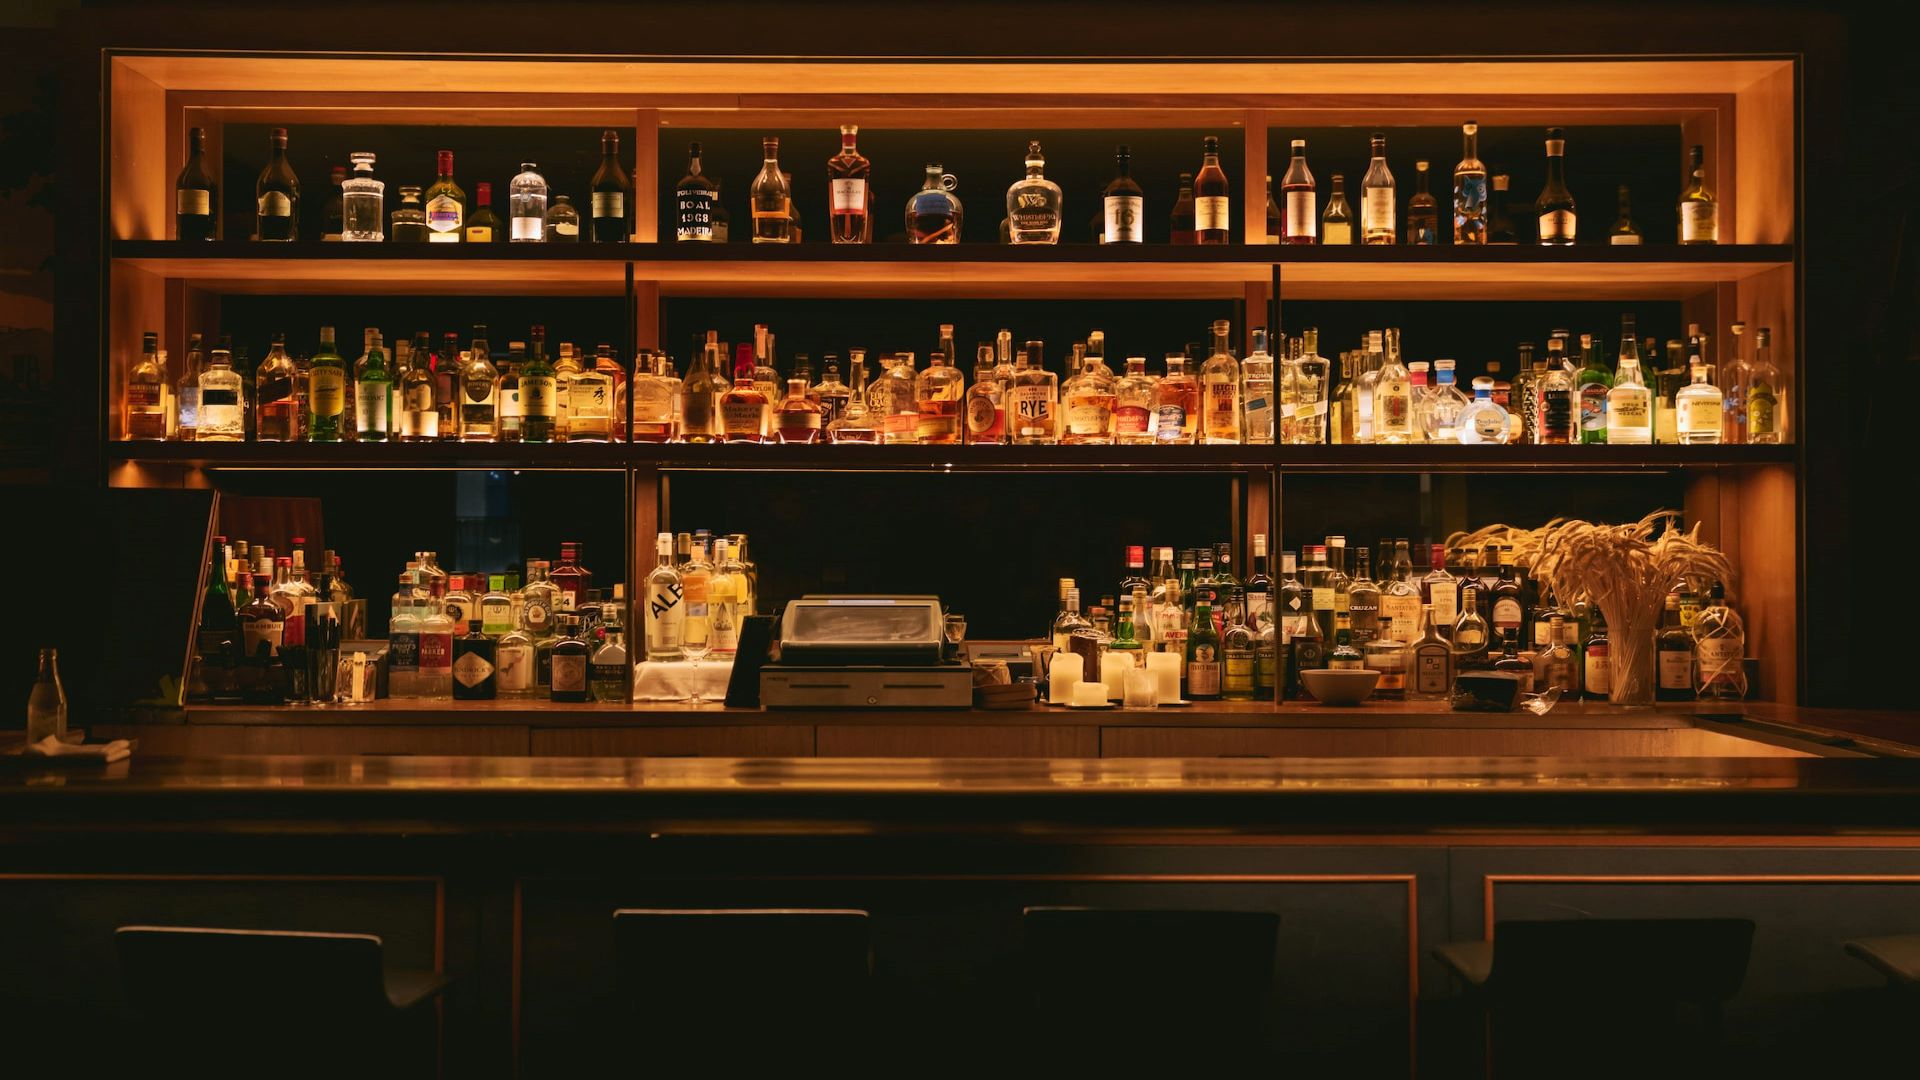 A bar, softly lit, with a row of bottles in the back.